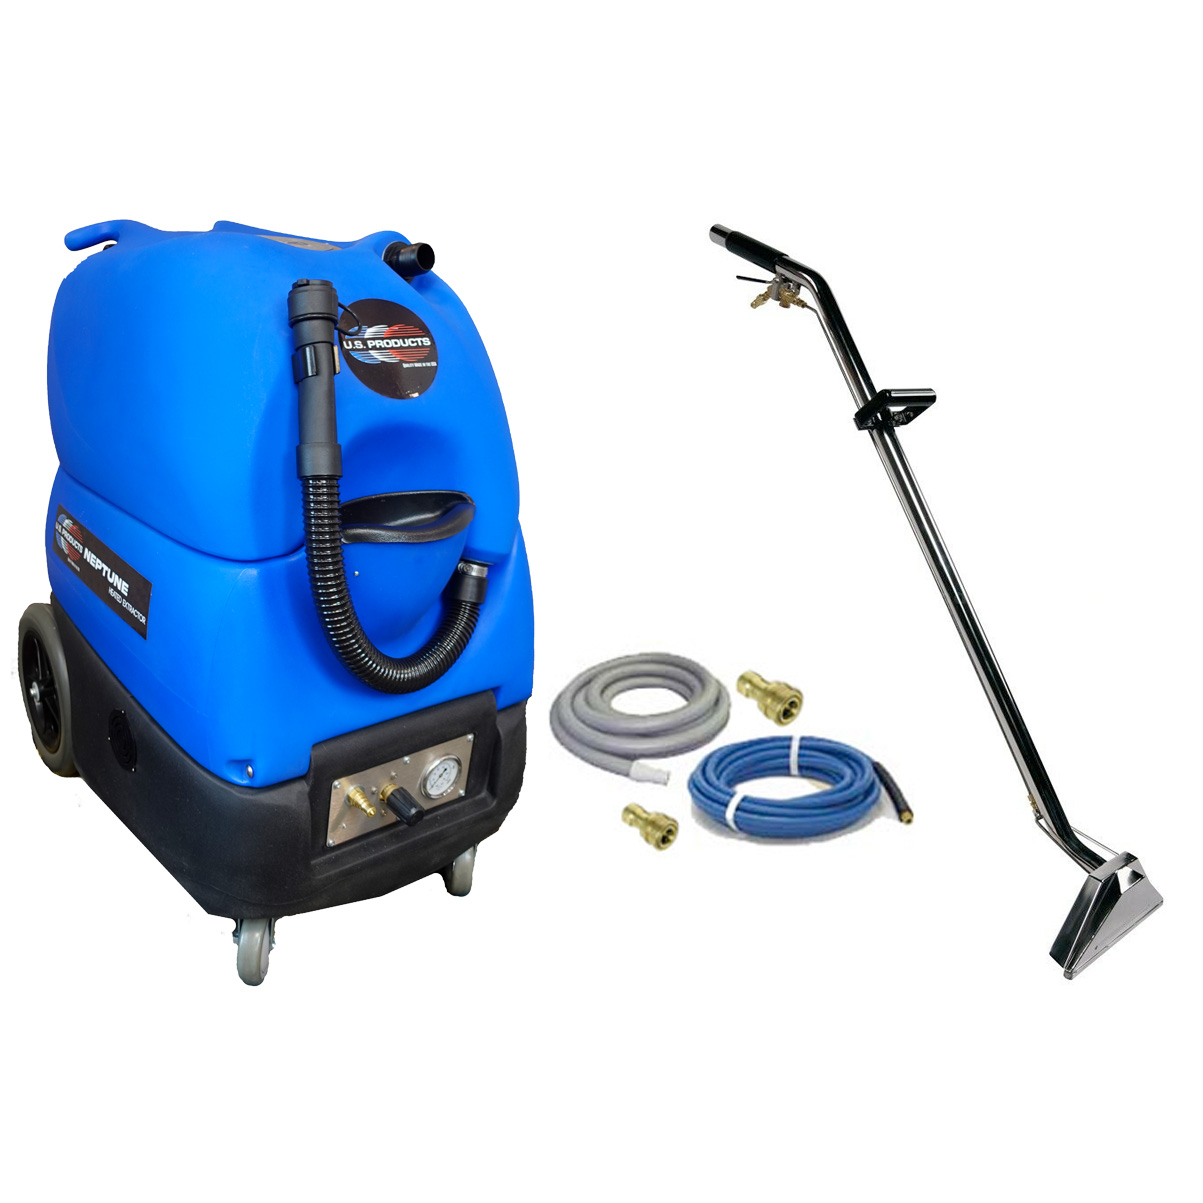 US Products Neptune NTU-500H 500 Psi HEATED DUAL 3 Stage Vac 15 Gallon Carpet Cleaning Extractor Starter Bundle 20220623